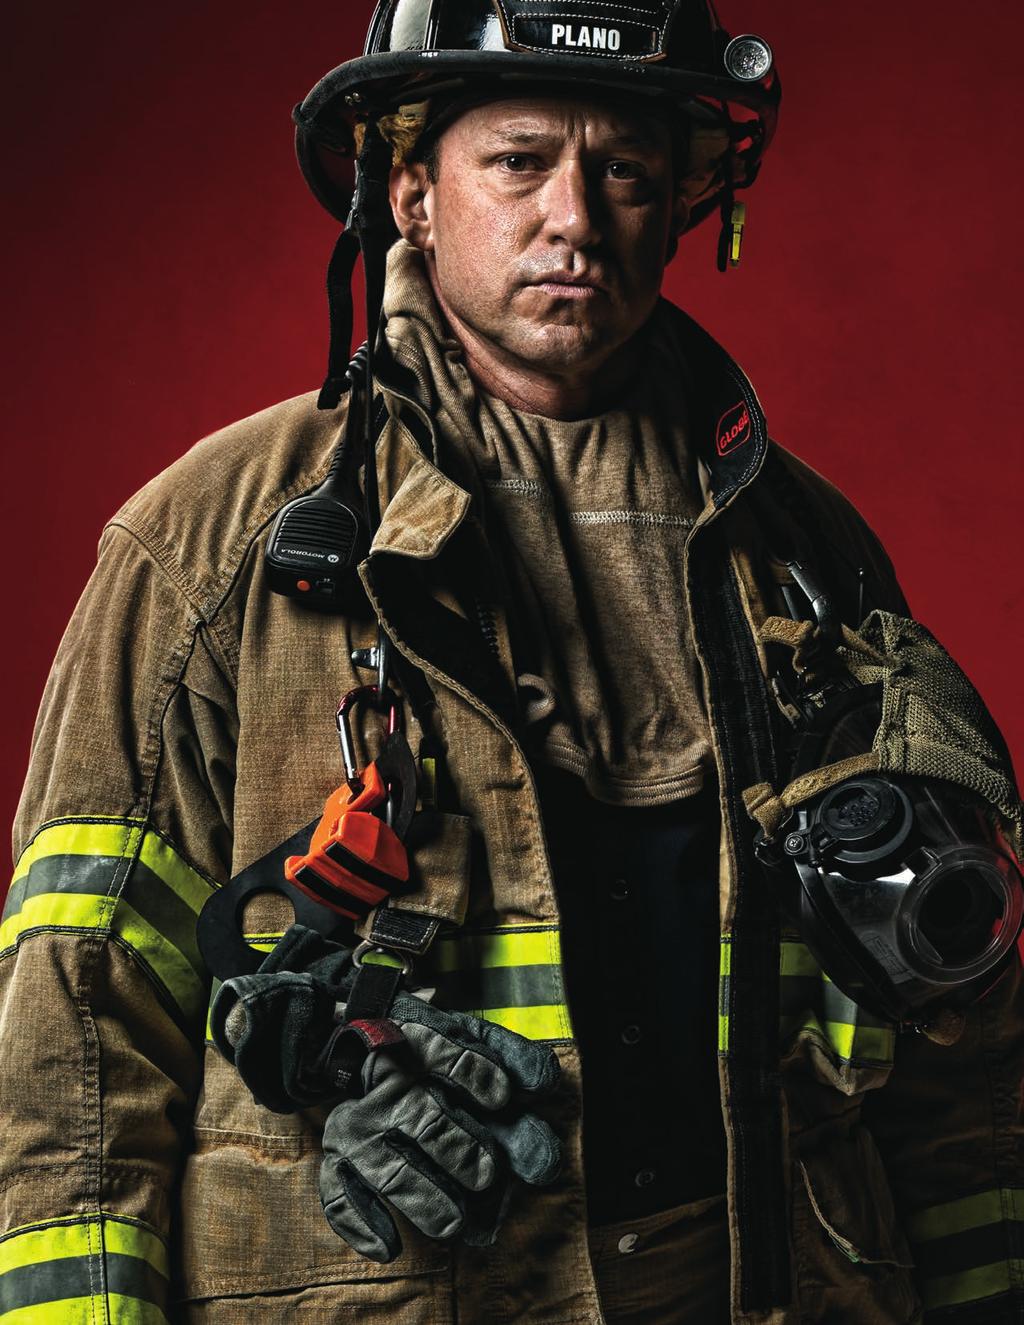 THE EVoLUTIon of athletic GEaR FoR FIREFIGHTERs. InTRodUcInG G-XTREME 3.0.